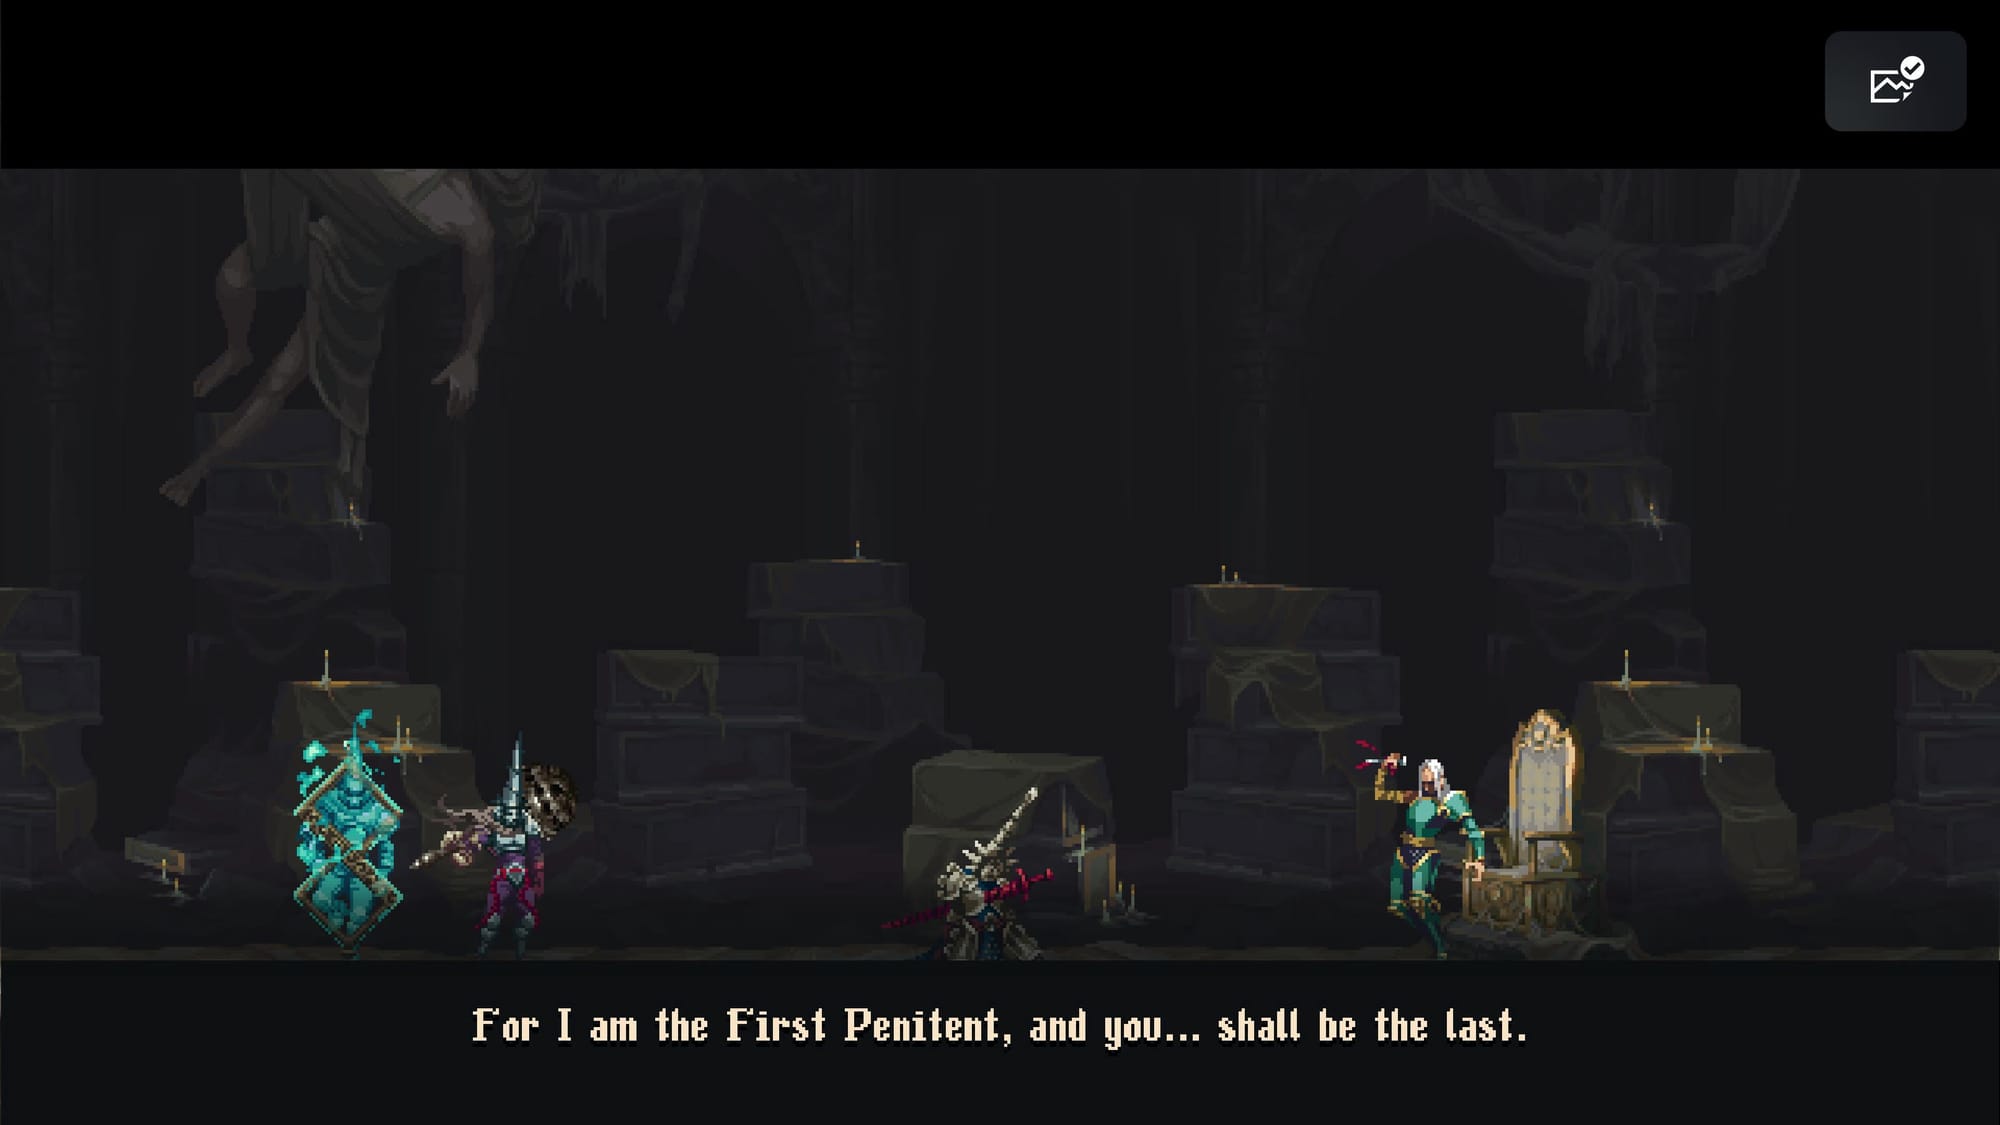 A screenshot of the boss fight. In the middle there is a dead body with a sword in the chest, looking as the main character. To the left is the main character next to the icon of his souls not yet collected. To the riht there is a thone and a boss character, with long white hair and a dagger in the hand. Background filled with boxes or coffins, making the atmosphere of an abandoned attic. 